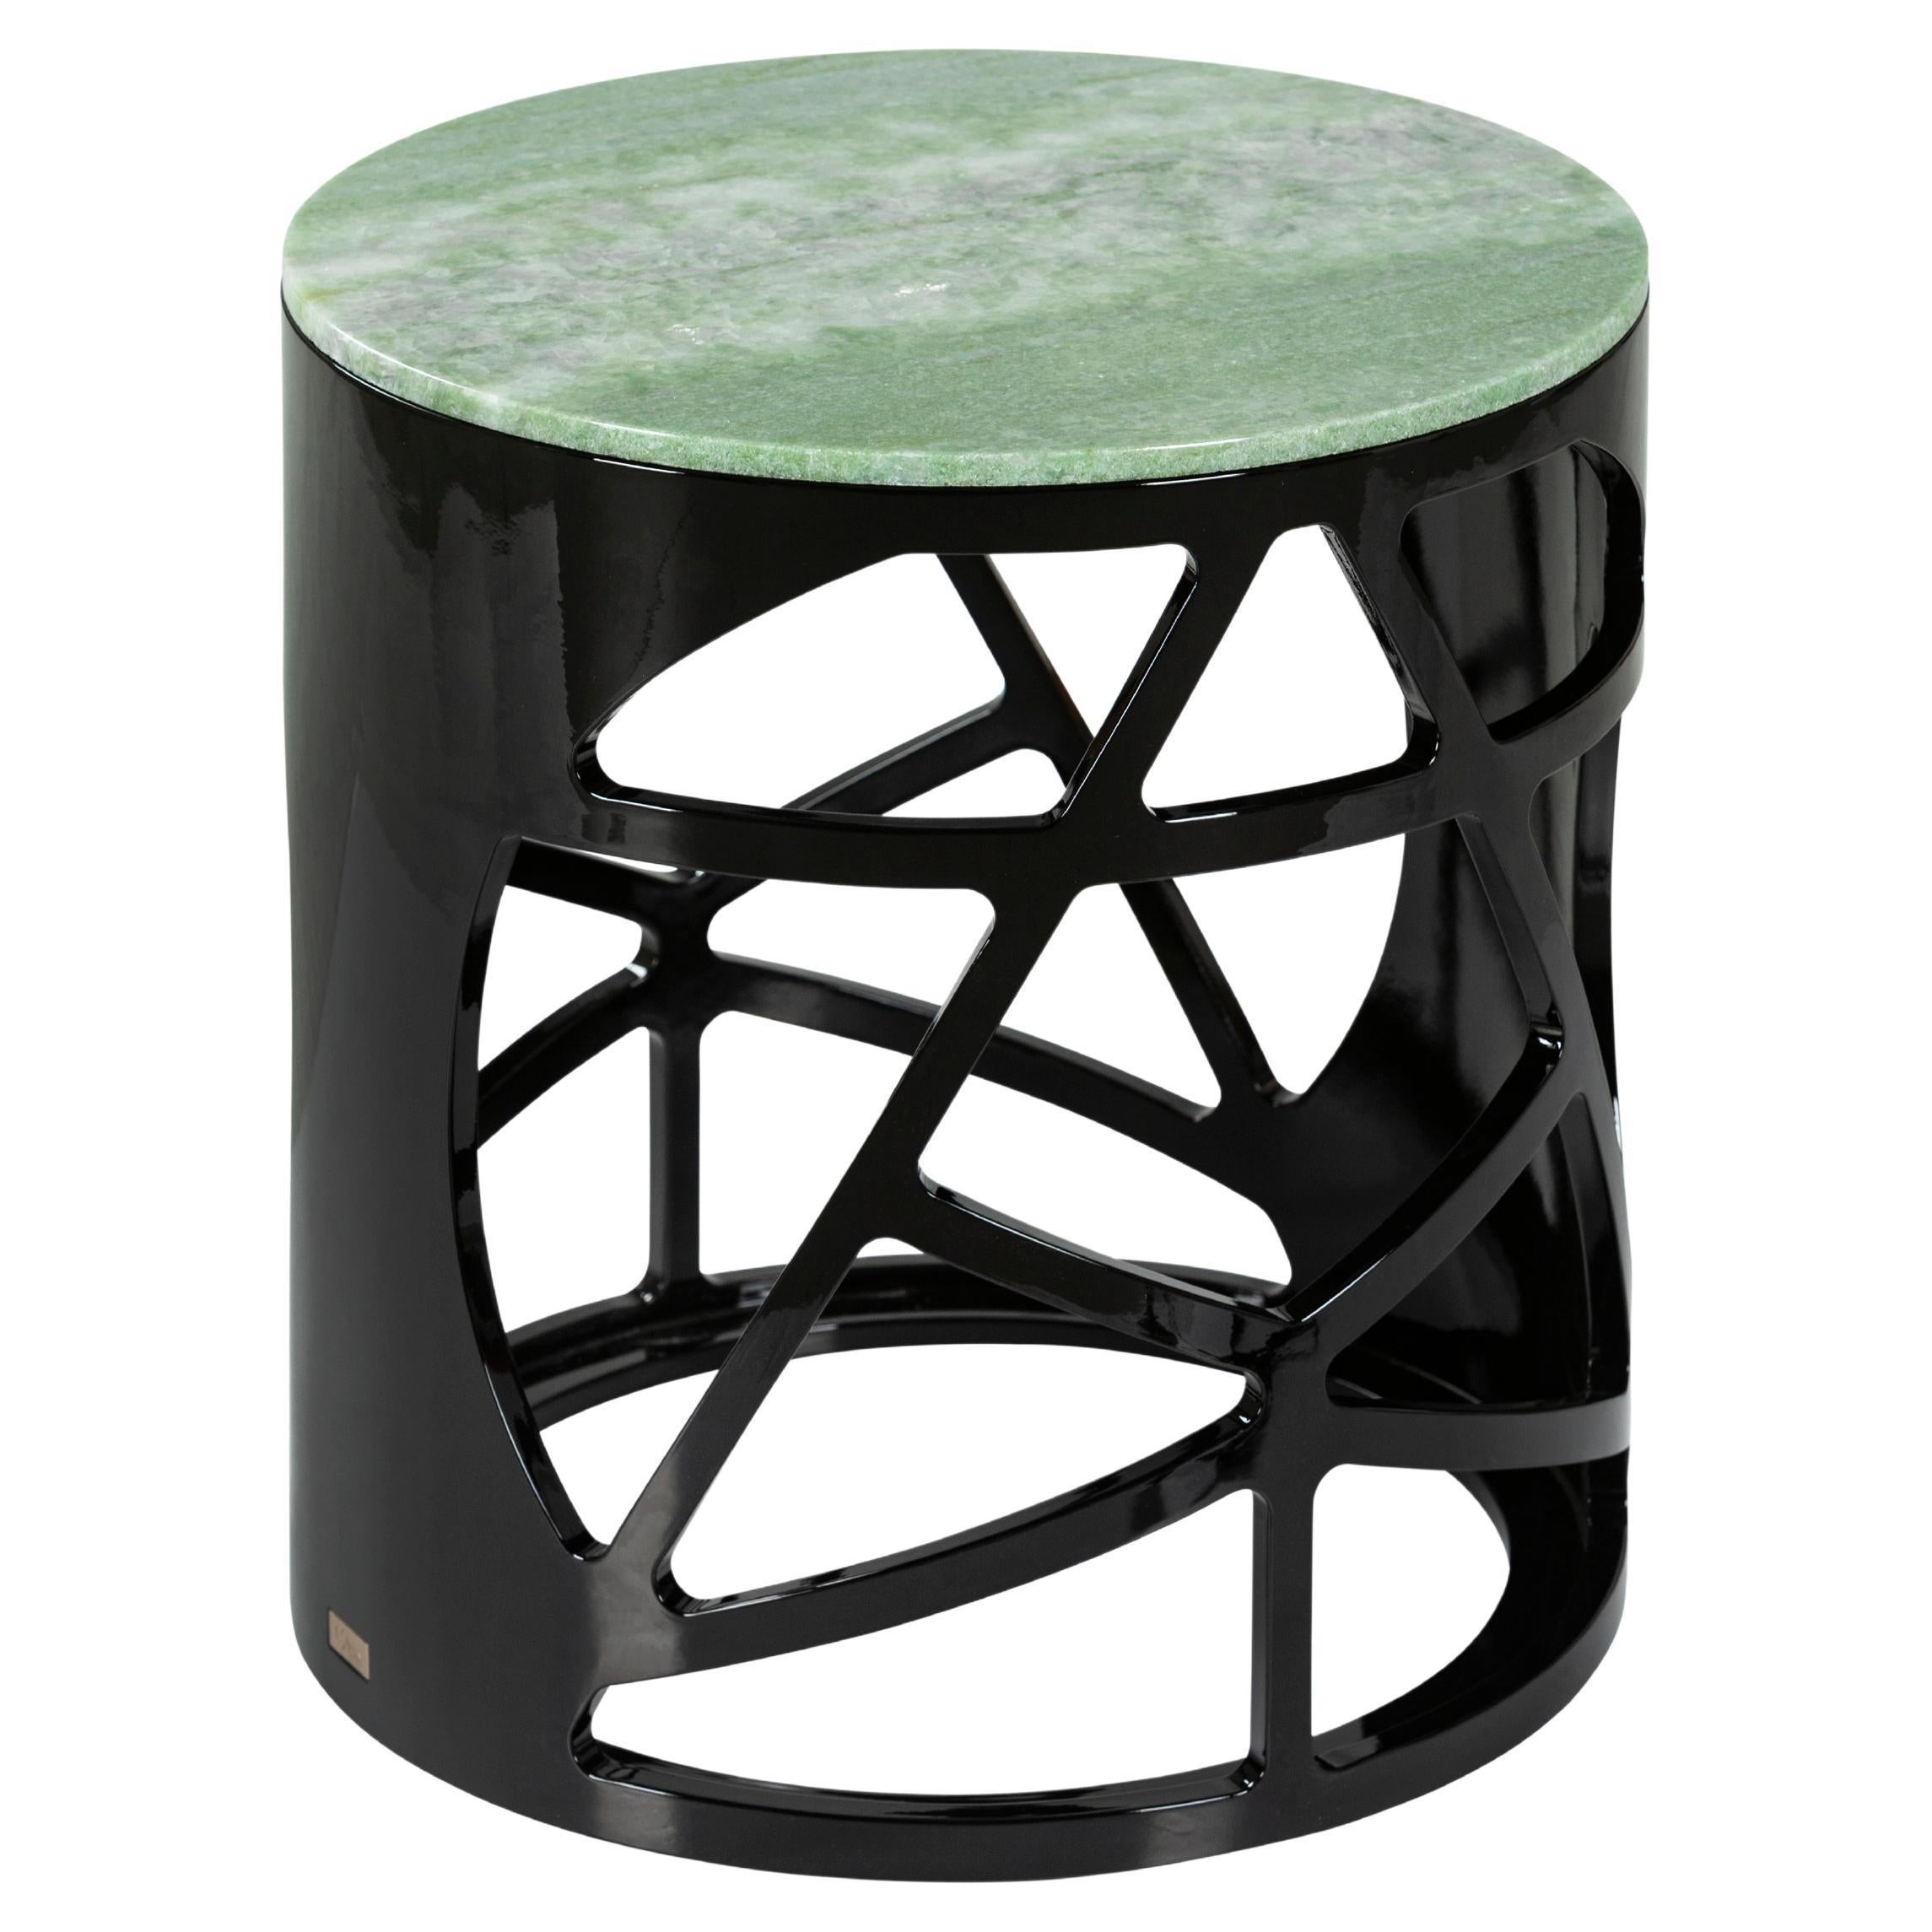 Greenapple Side Table, Pyrite Side Table, Green Marble, Handmade in Portugal